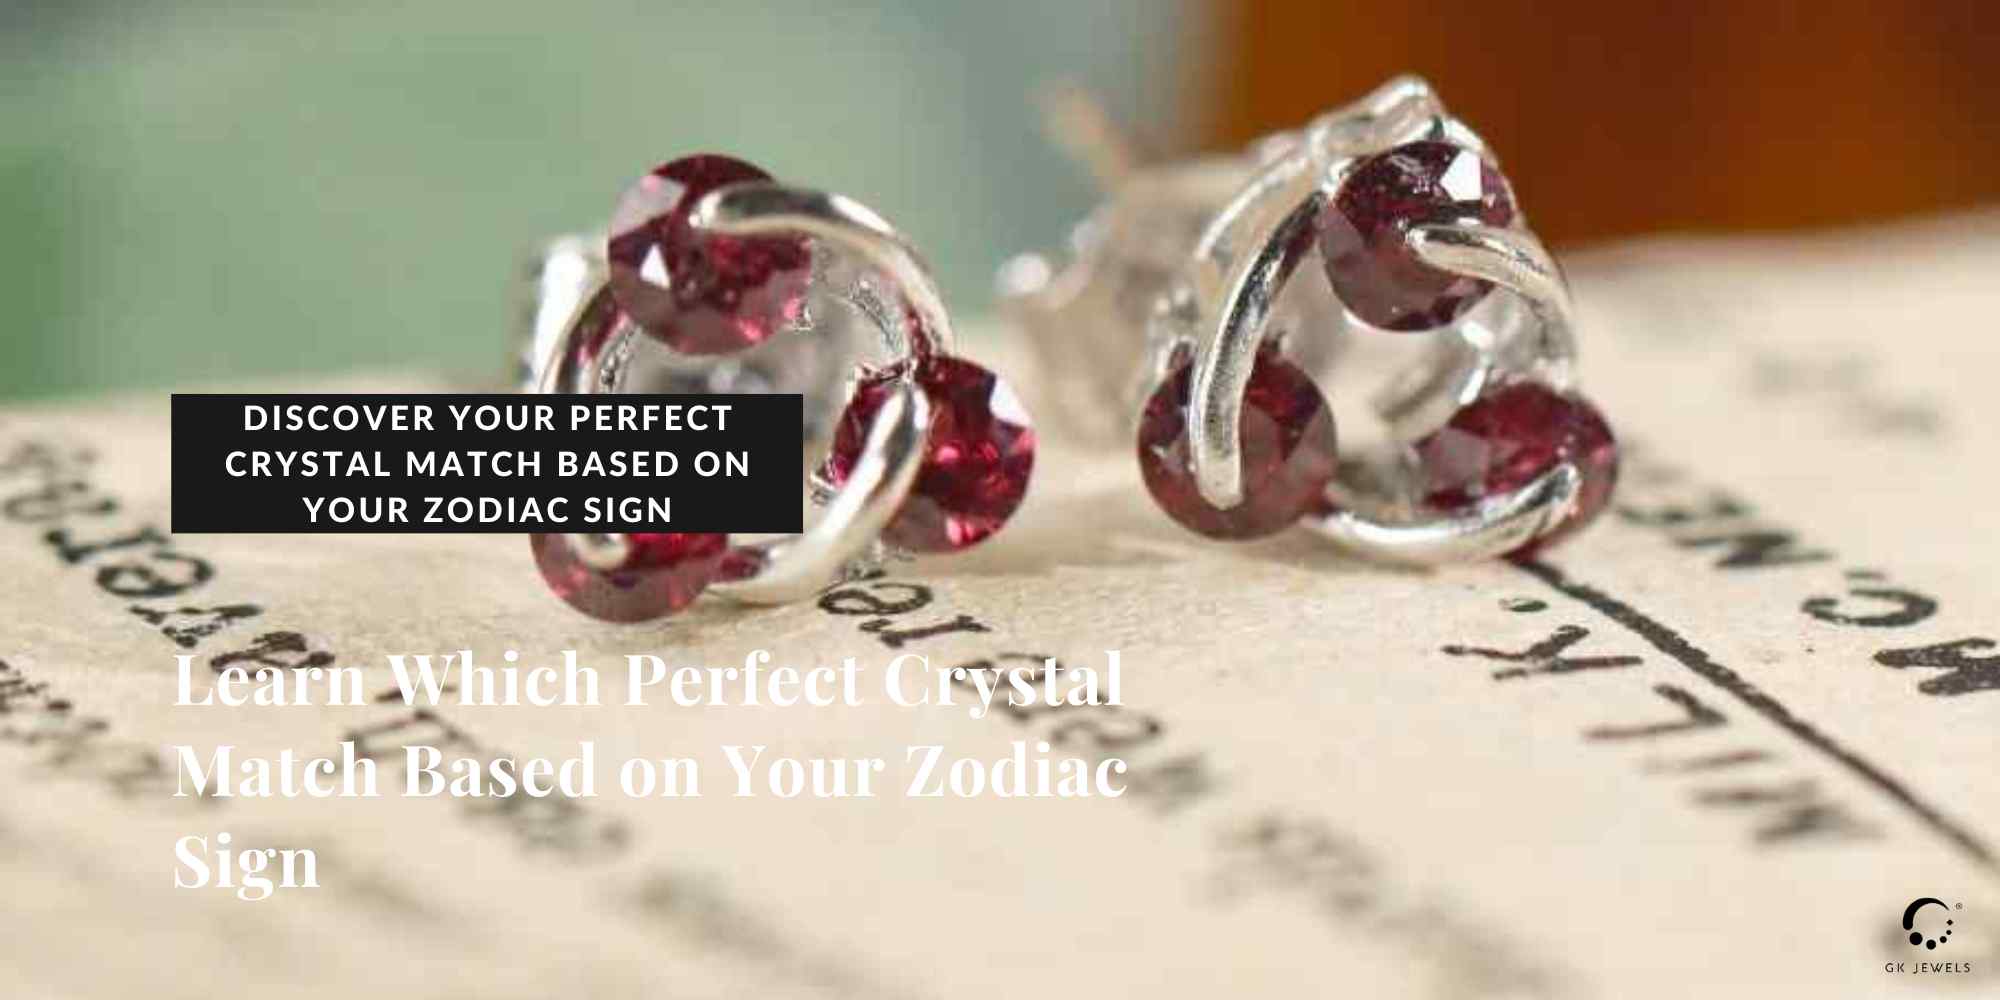 Discover Your Perfect Crystal Match Based on Your Zodiac Sign